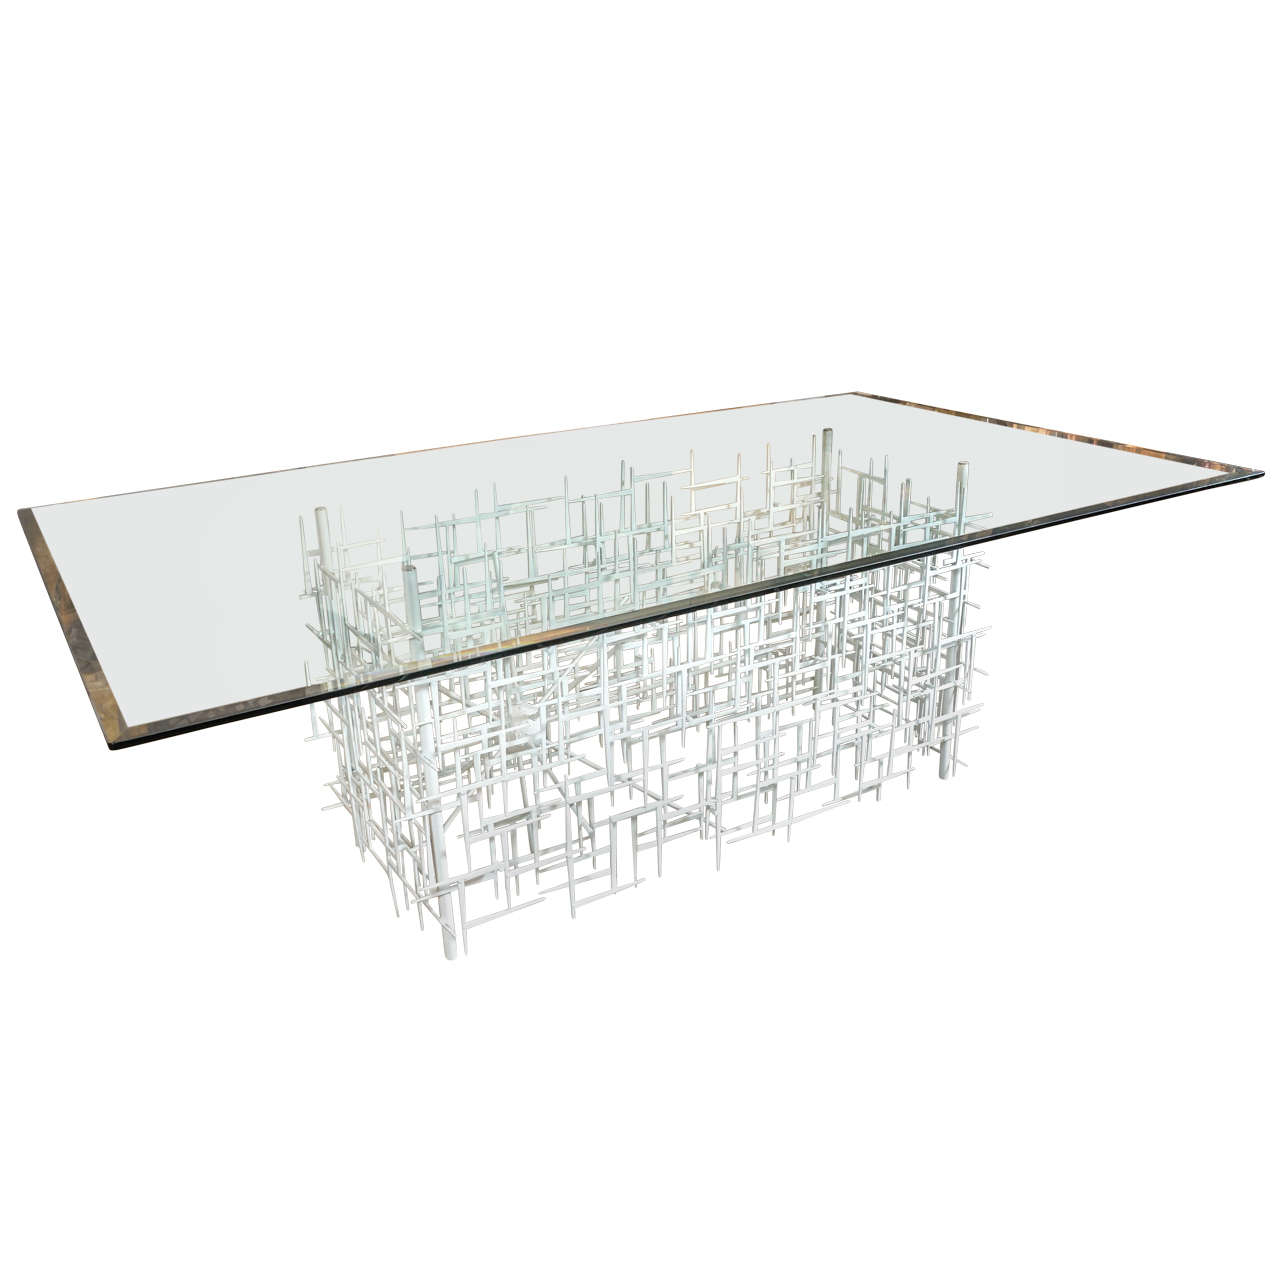 Custom Original Lou Blass "Quadrant" Sculptural Dining Table, made in the USA For Sale